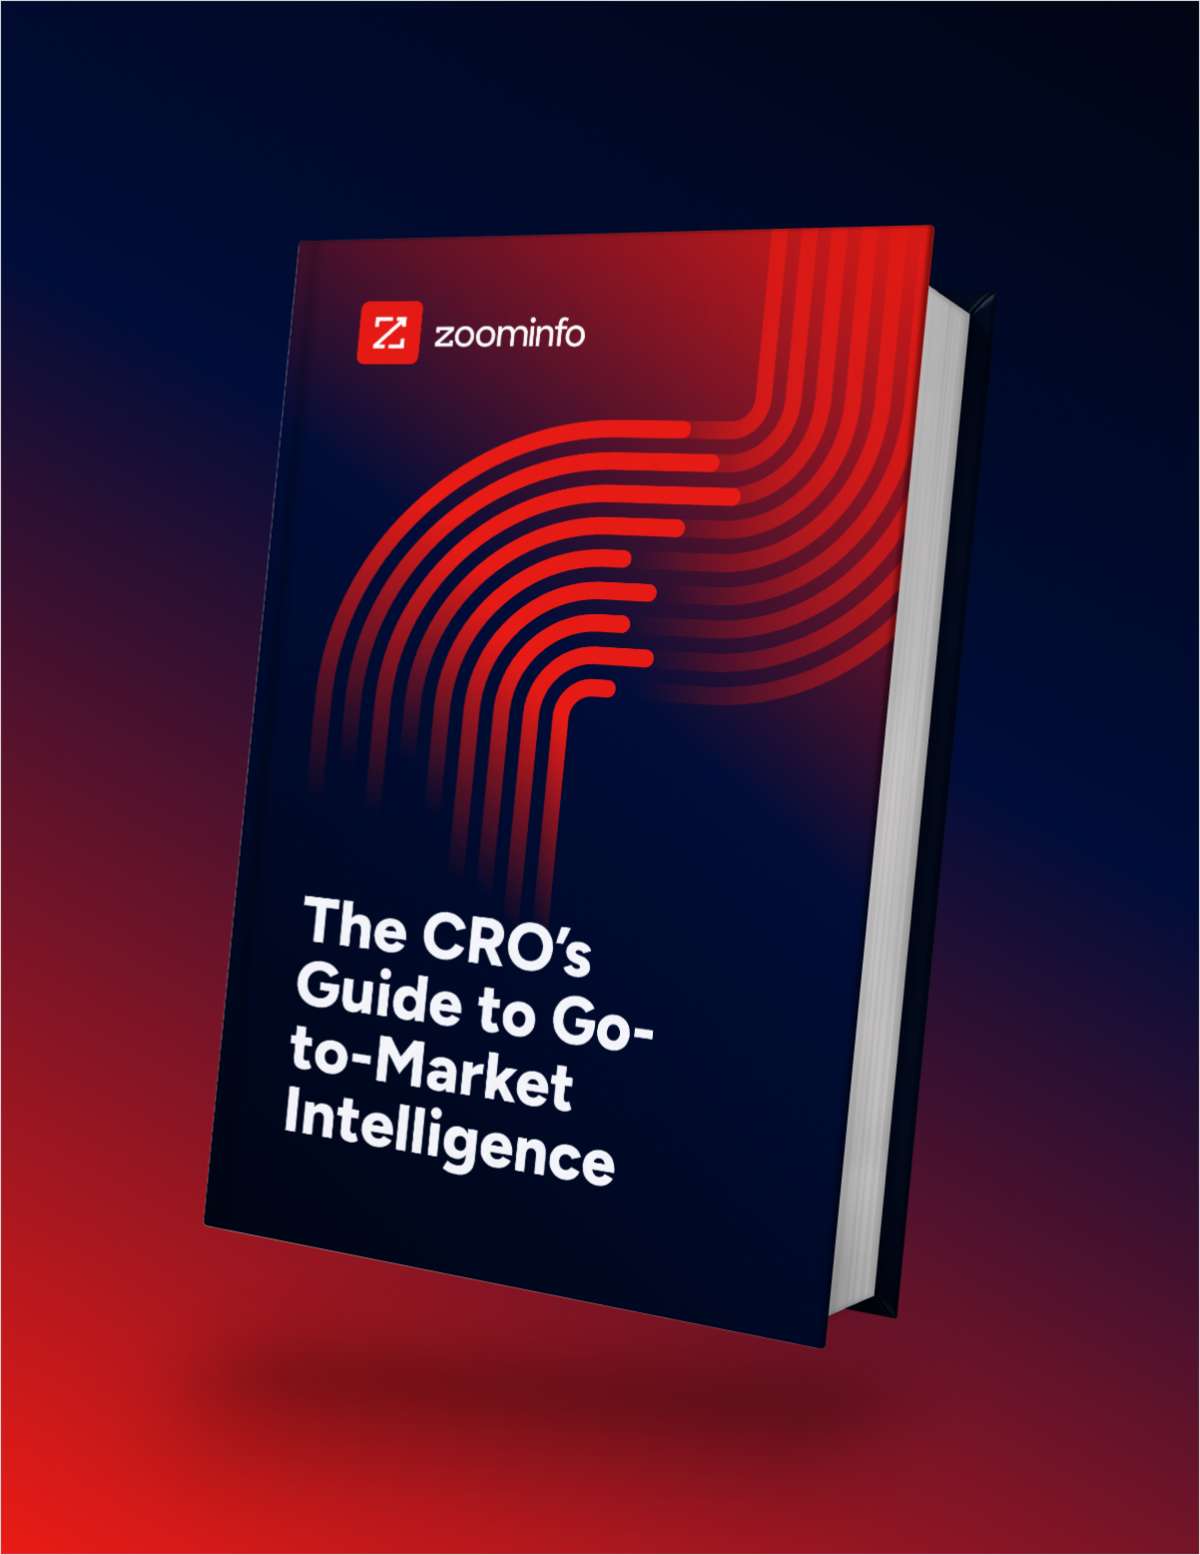 The CRO's Guide to Go-to-Market Intelligence